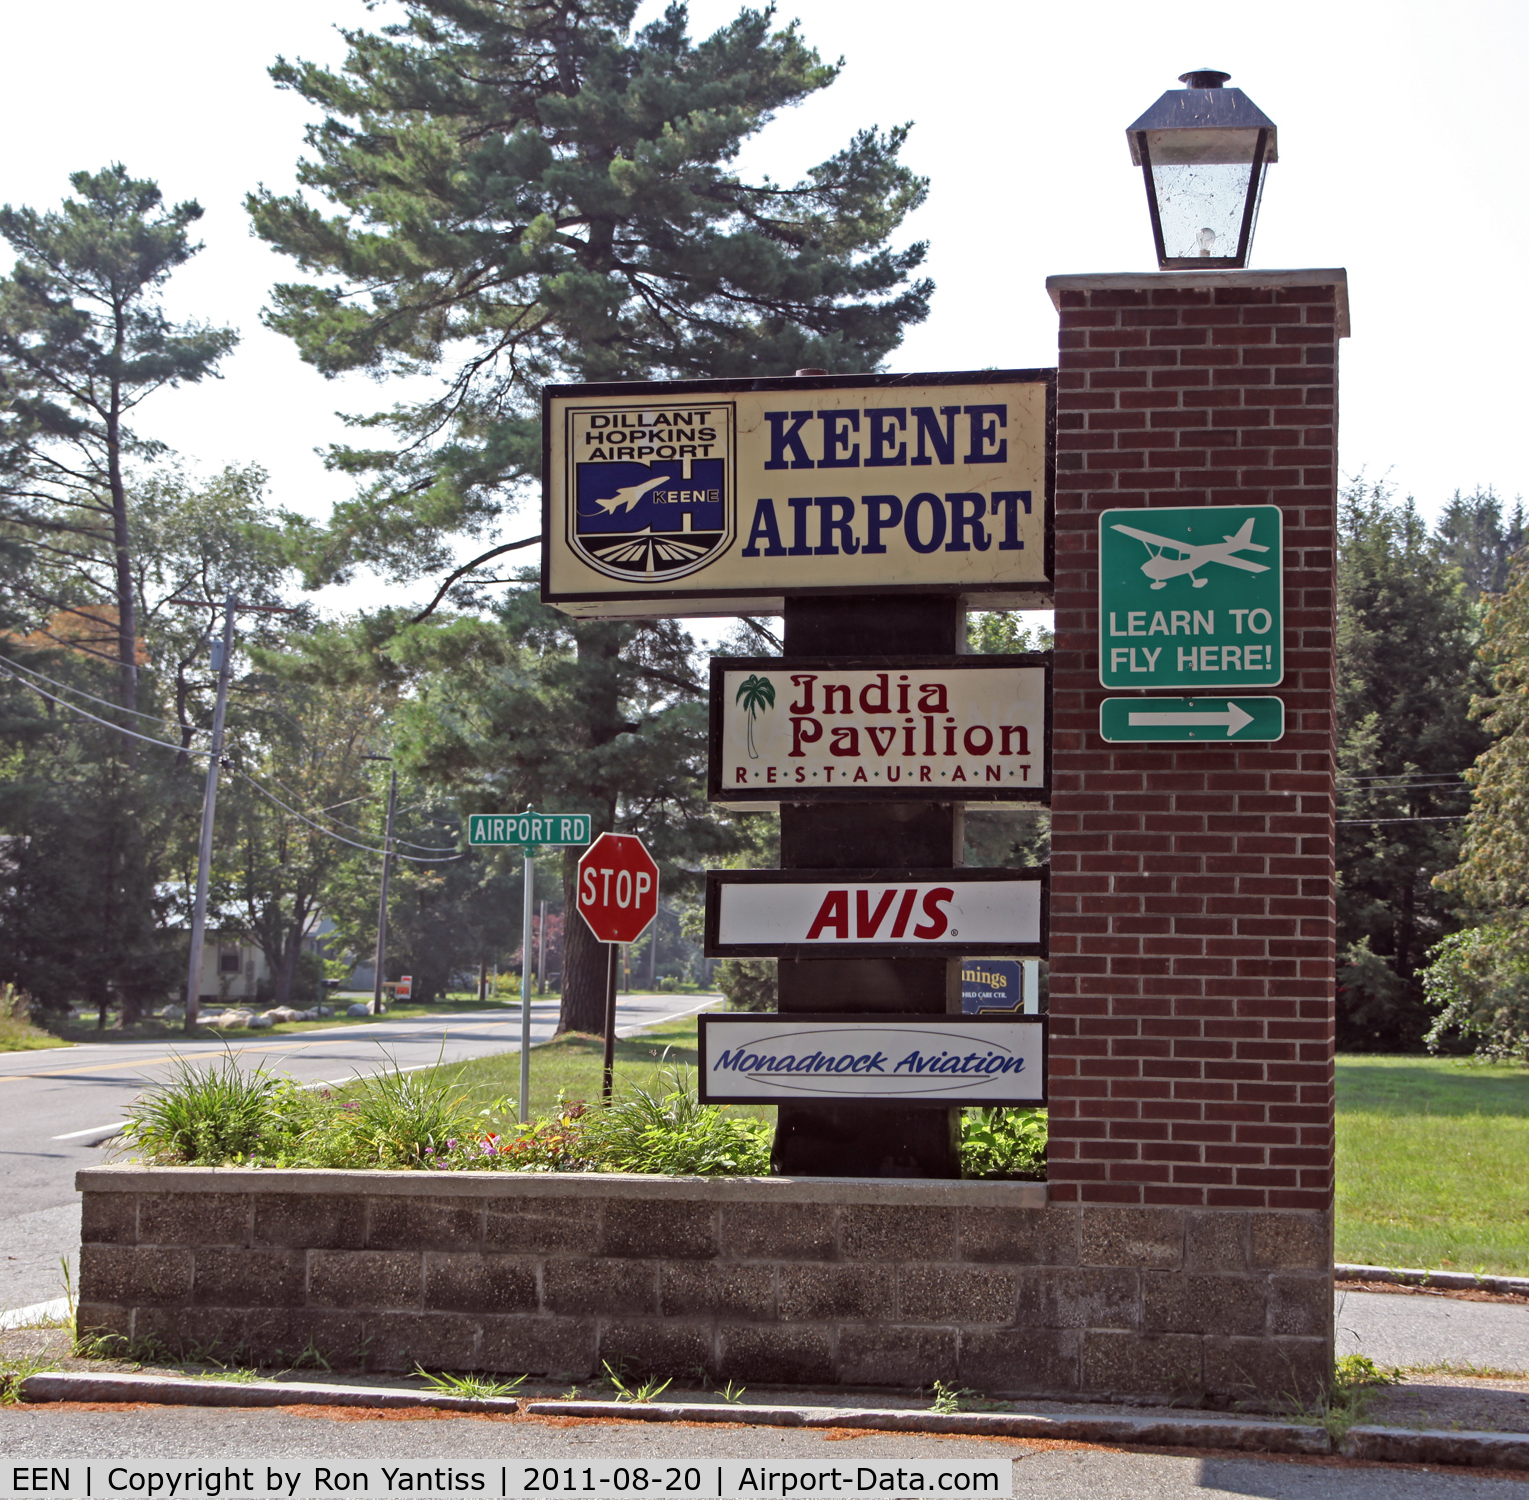 Dillant-hopkins Airport (EEN) - Entrance to the main terminal at Dillant-Hopkins Airport, Keene, NH